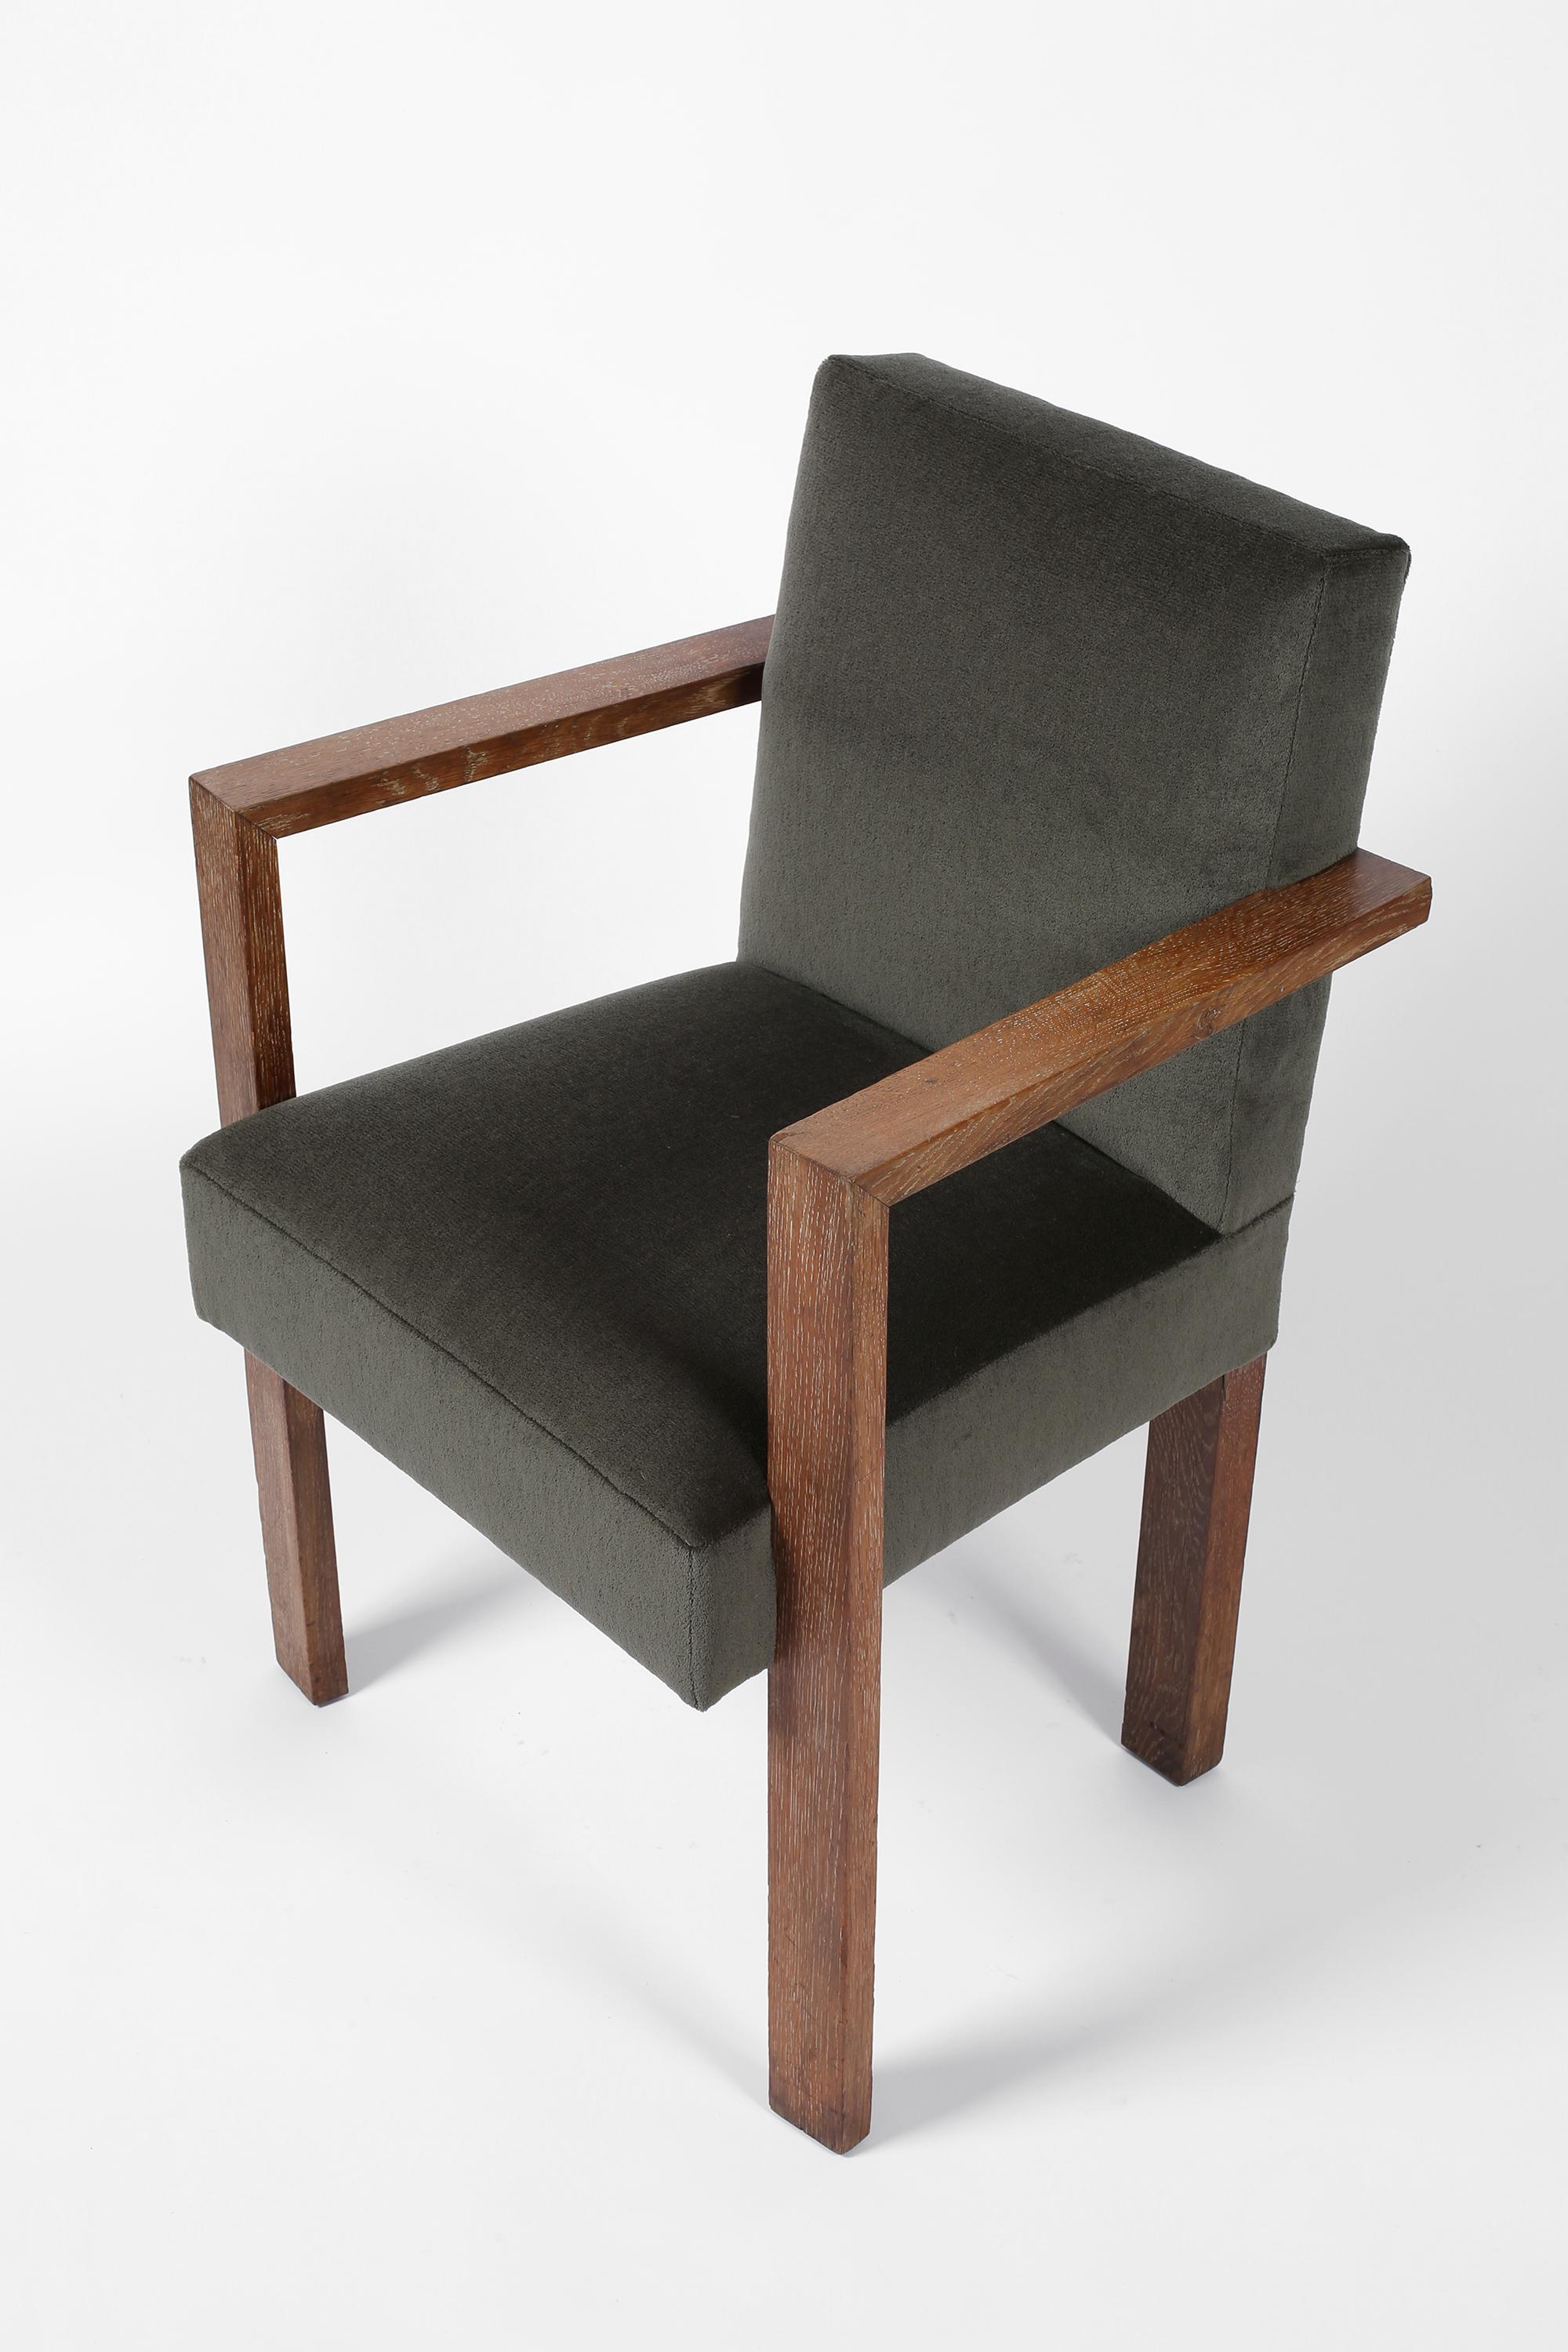 Mid-20th Century 1940s French Modernist Armchair in Limed Oak and Mohair For Sale